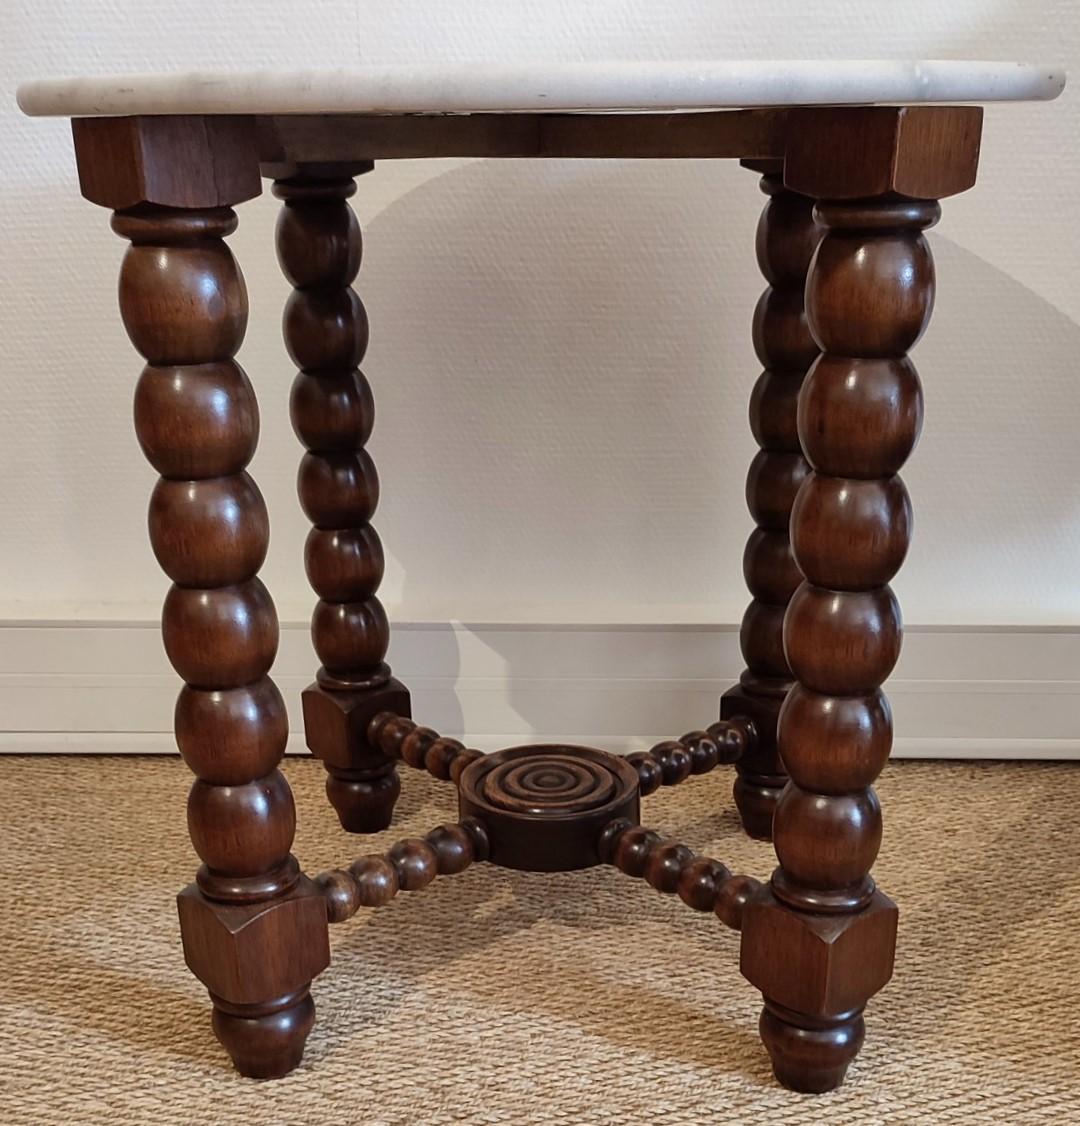 Mahogany Beaded Gueridon with marble top. Very warm Colors and Gorgeous Patina.
Inspired by Works of Gascoin or Dudouyt, Major French Designers of Mid 20th-Century.